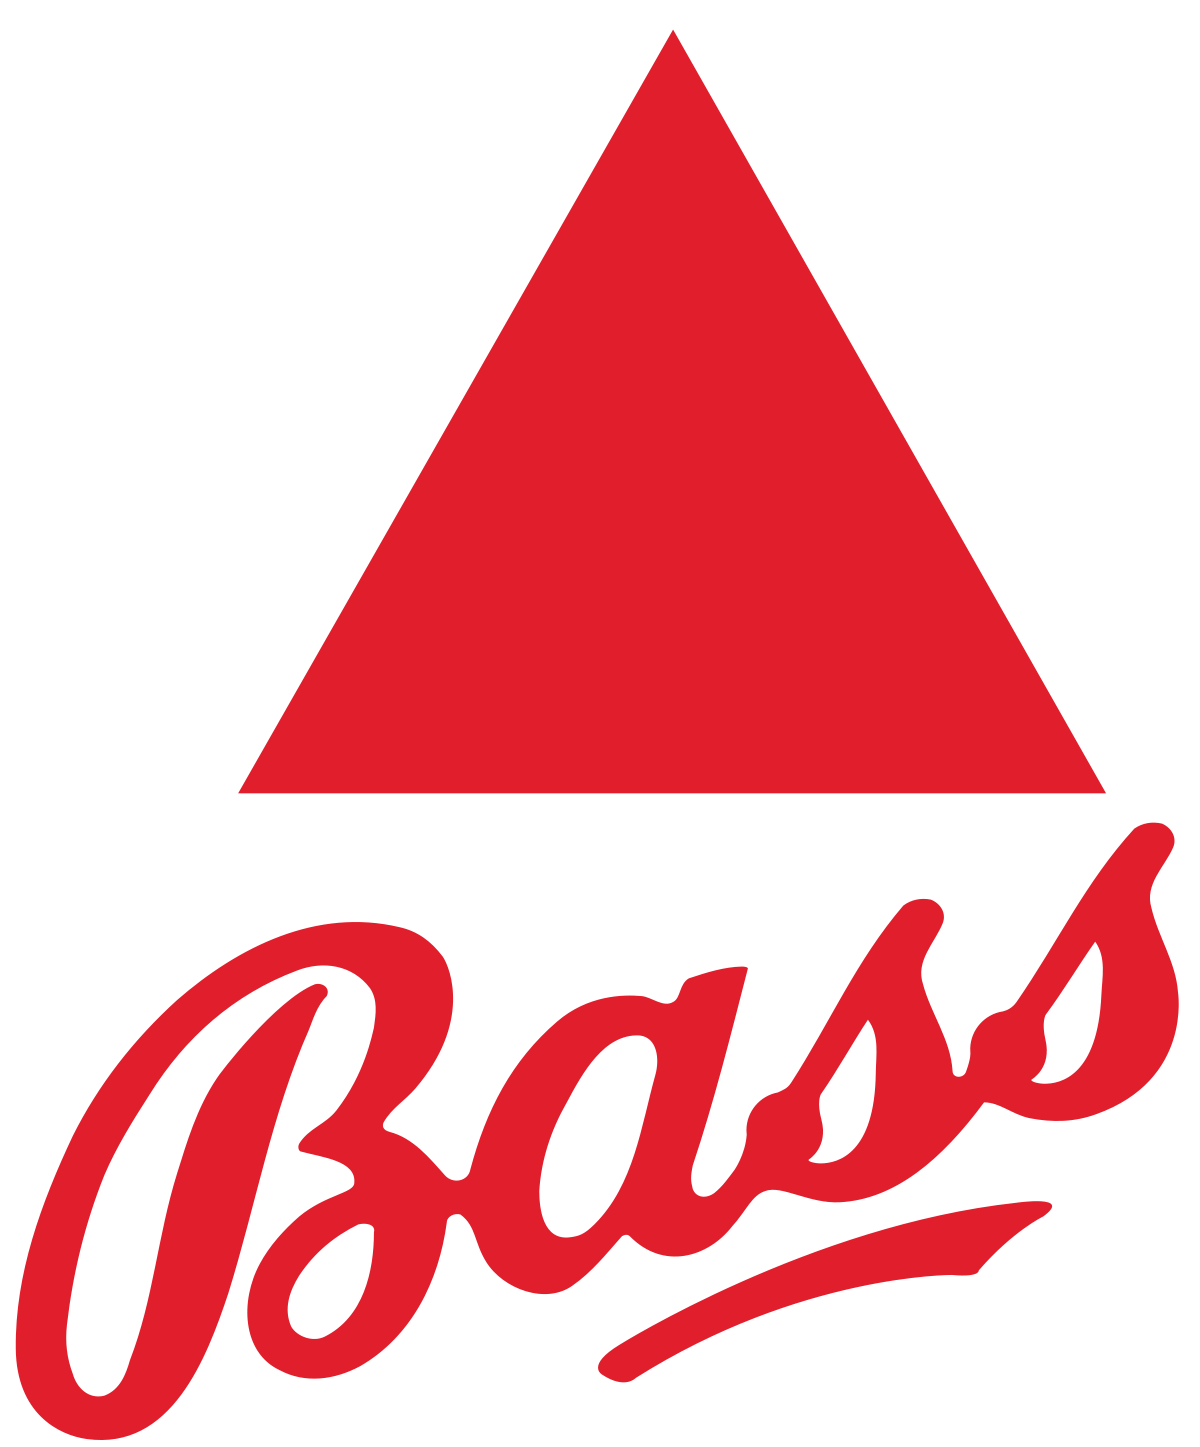 Four Red Triangles Logo - Bass Brewery